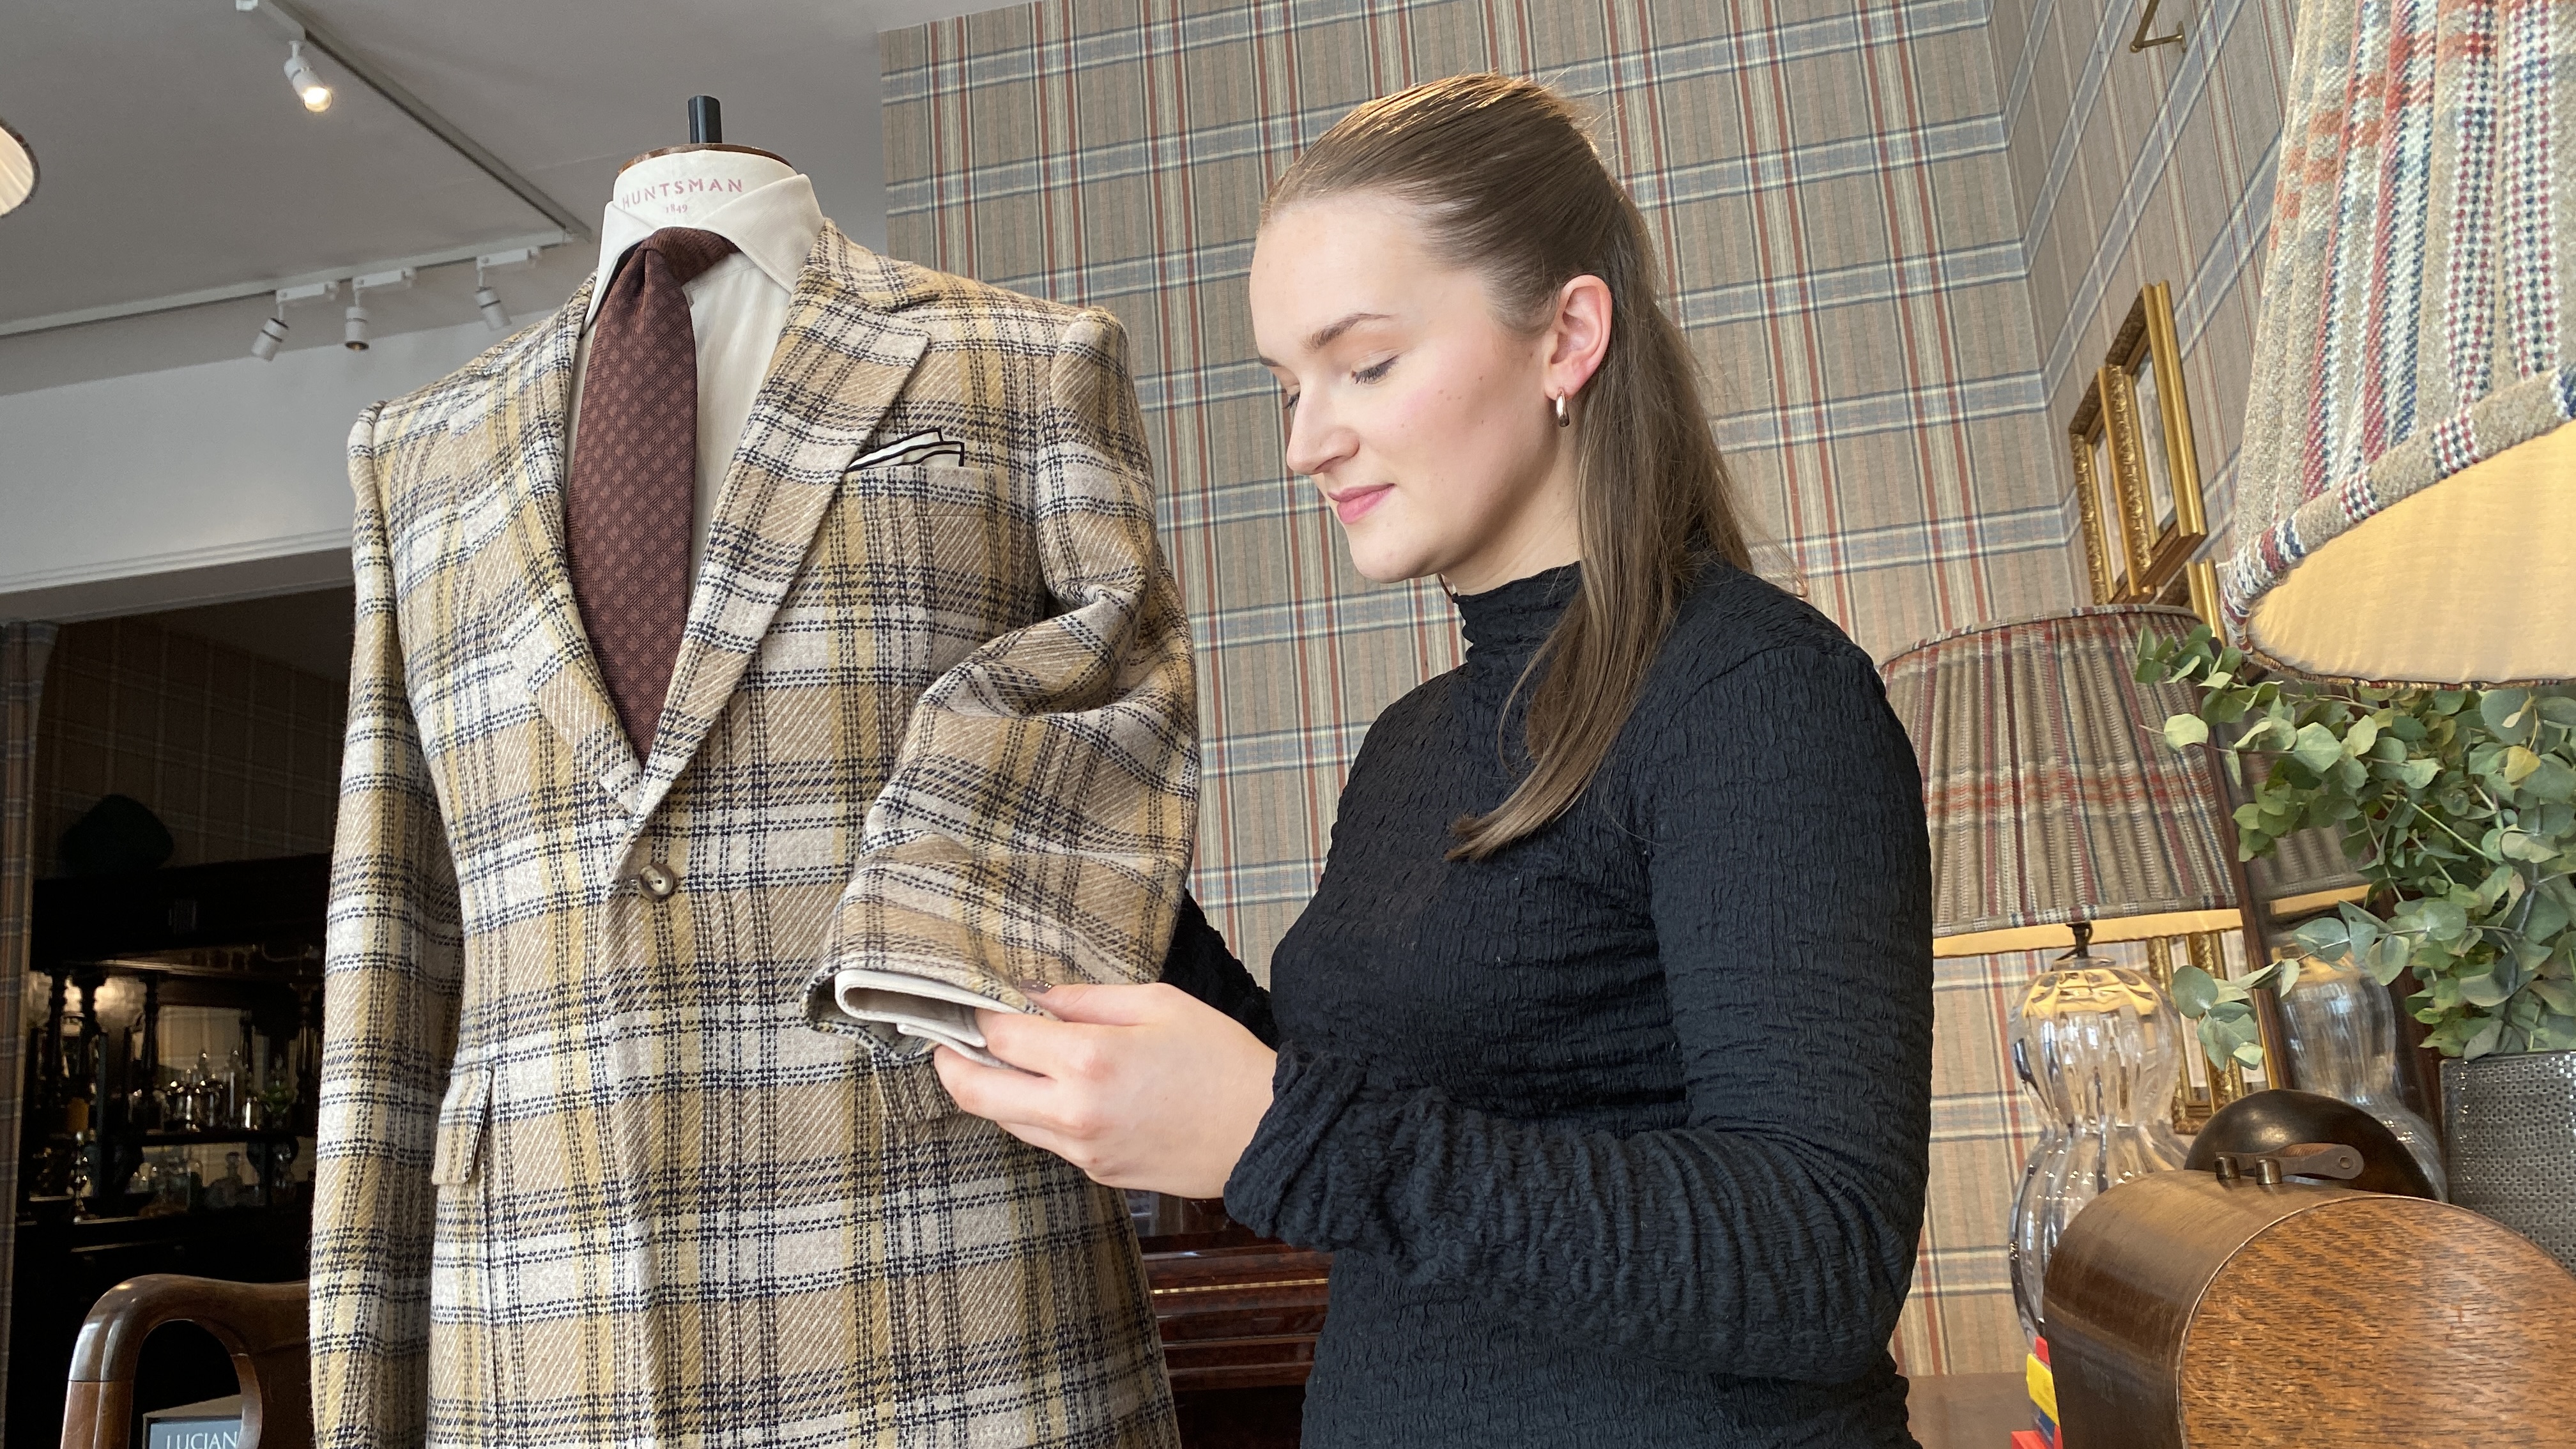 Lois looks at a jacket made from her winning fabric